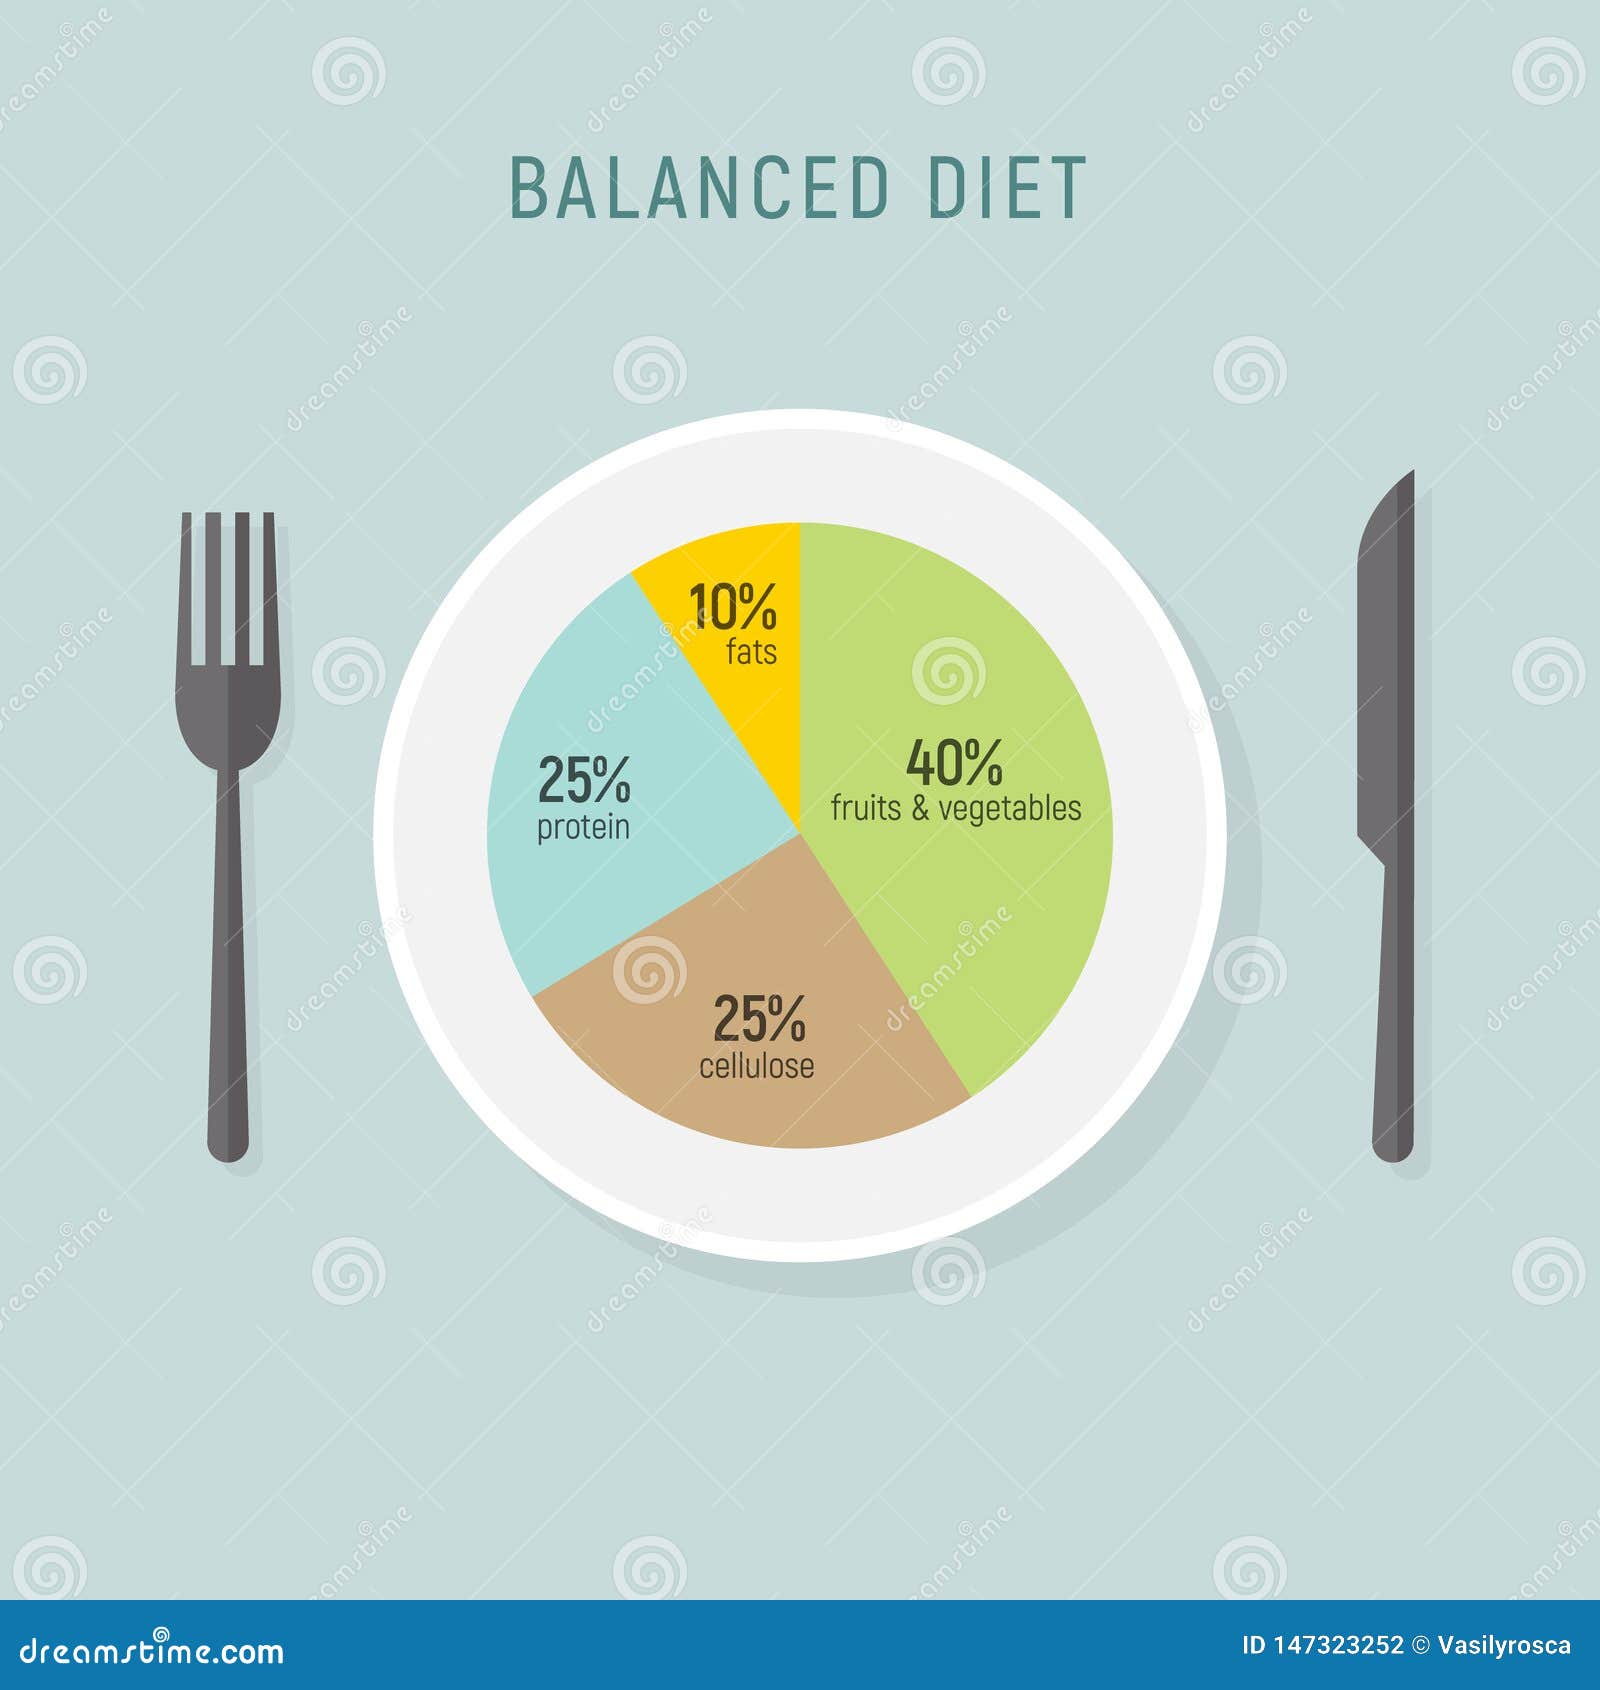 https://thumbs.dreamstime.com/z/healthy-diet-food-balance-nutrition-plate-vector-health-meal-chart-infographic-diet-plan-concept-healthy-diet-food-balance-147323252.jpg